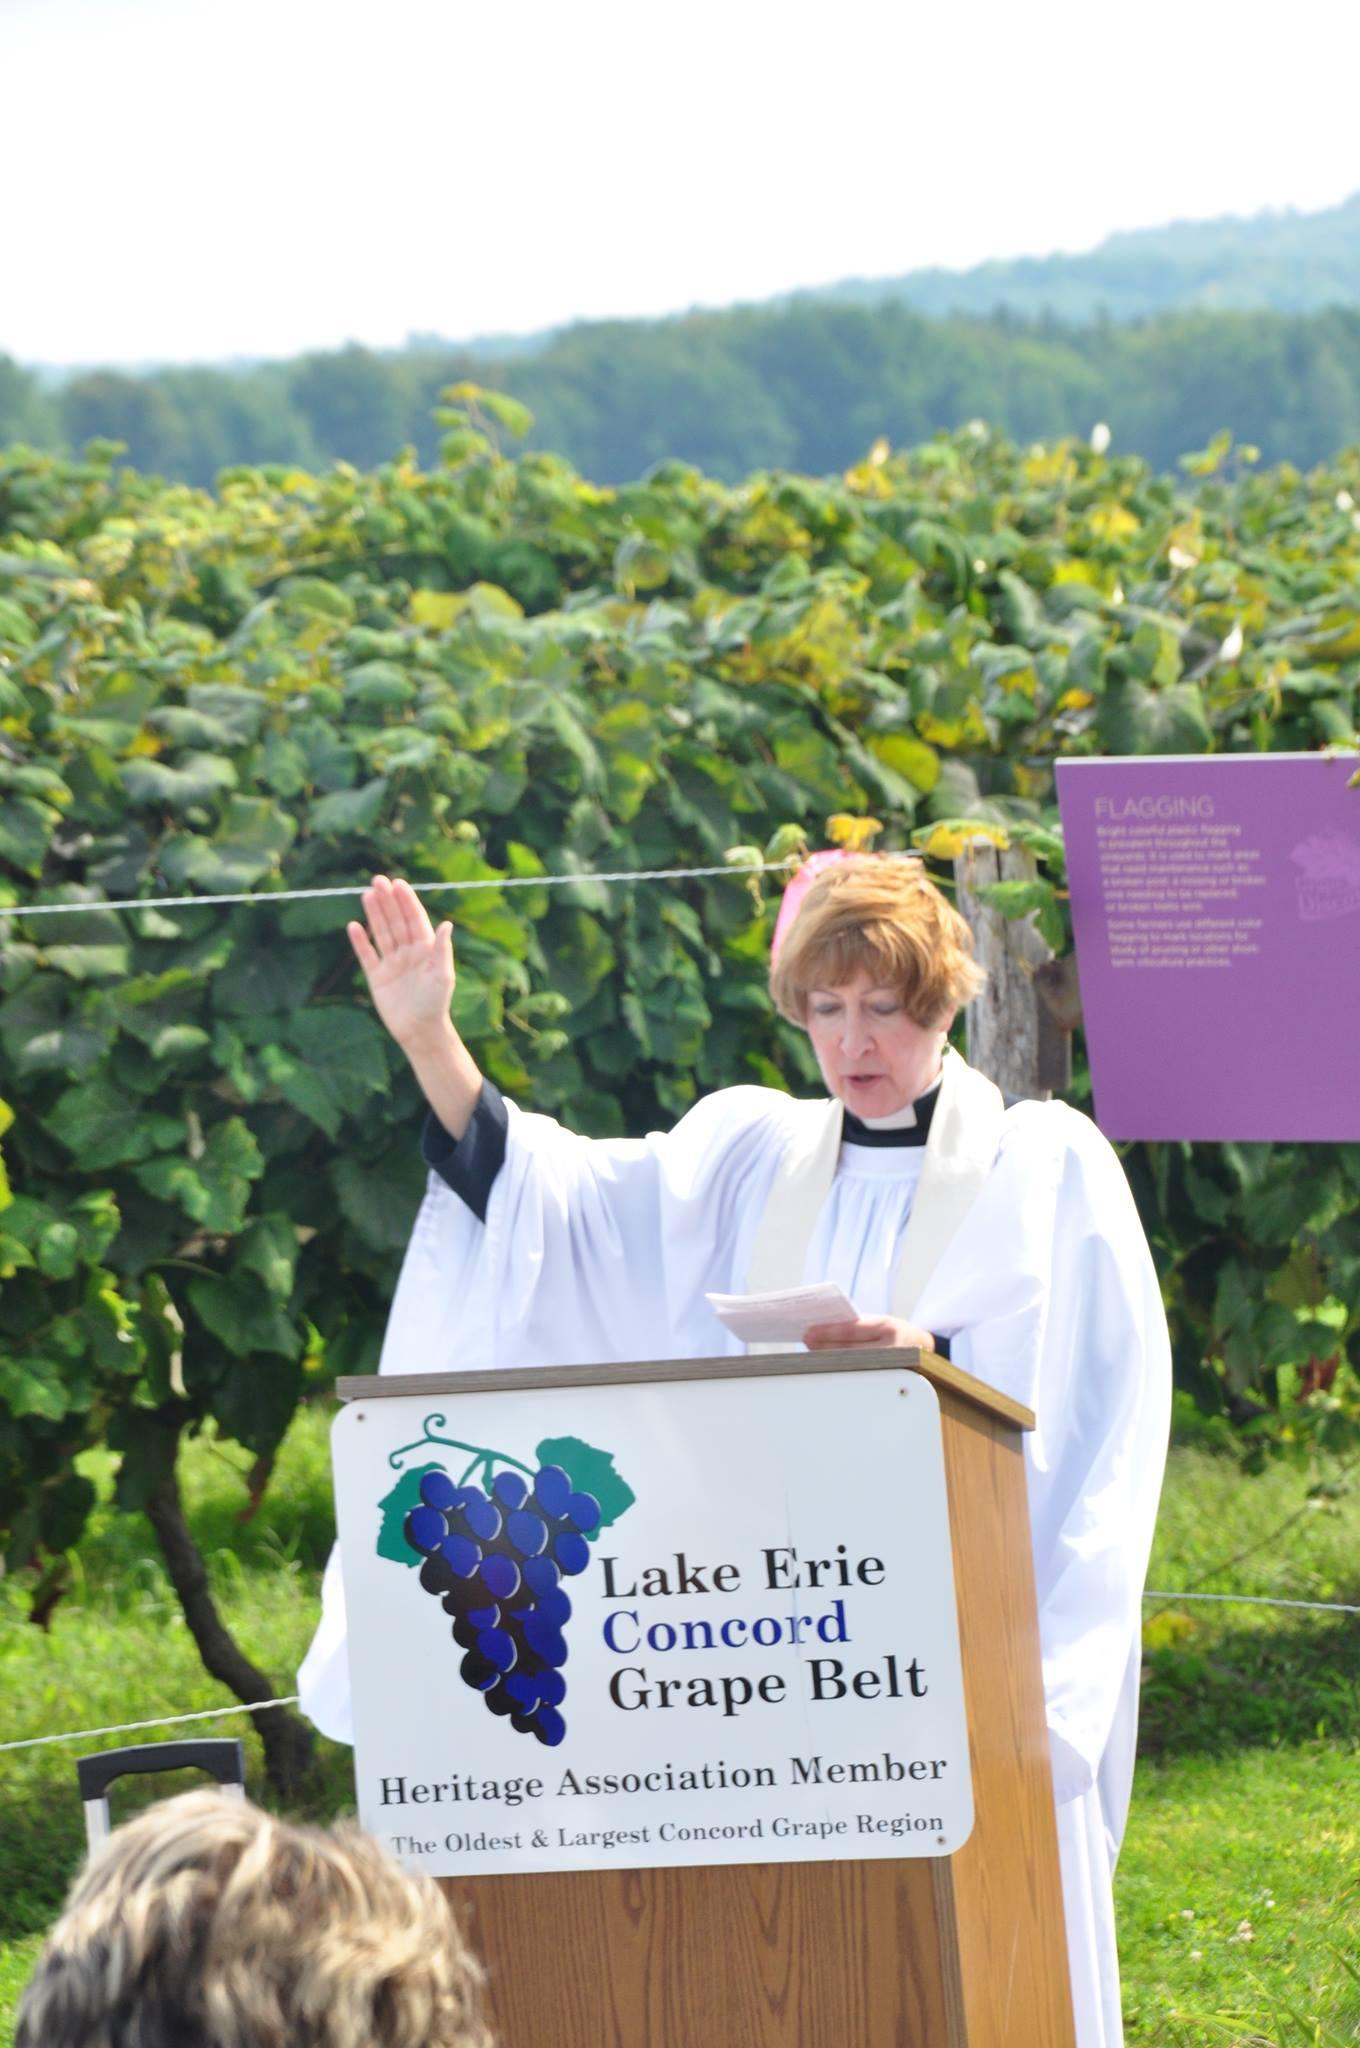 Blessing of the Grapes